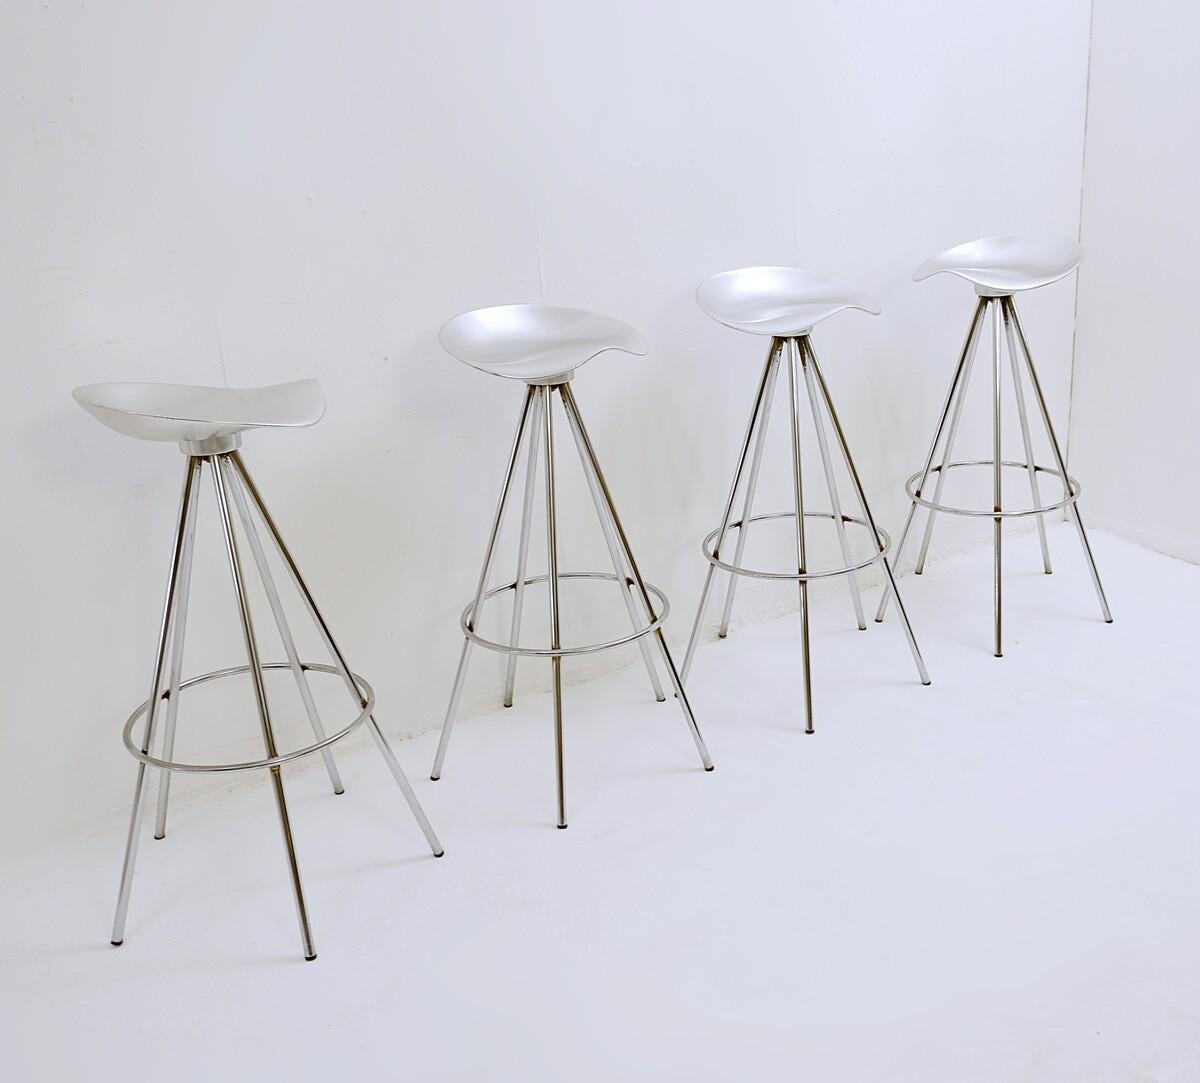 Mid Century Modern 'Jamaica' Stools, by Pepe Cortés, Amat-3 in aluminium - chrome 1990s for sale in Seating, Other  Via Antica

